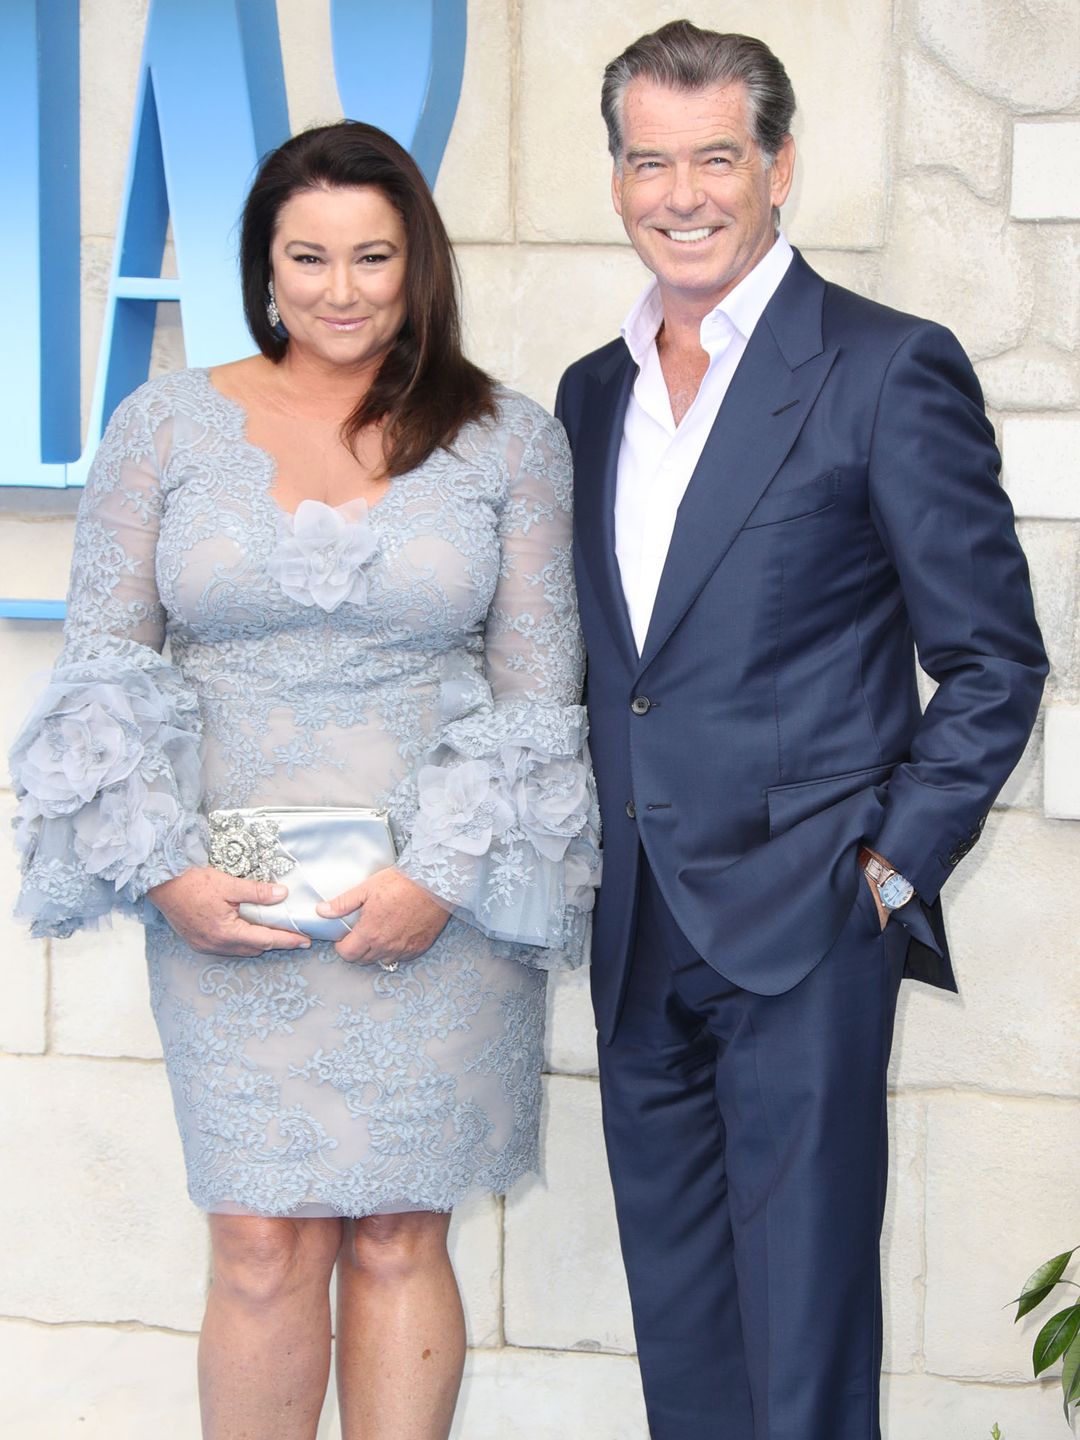 Keely Shaye Smith and Pierce Brosnan smiling at a red carpet shoot